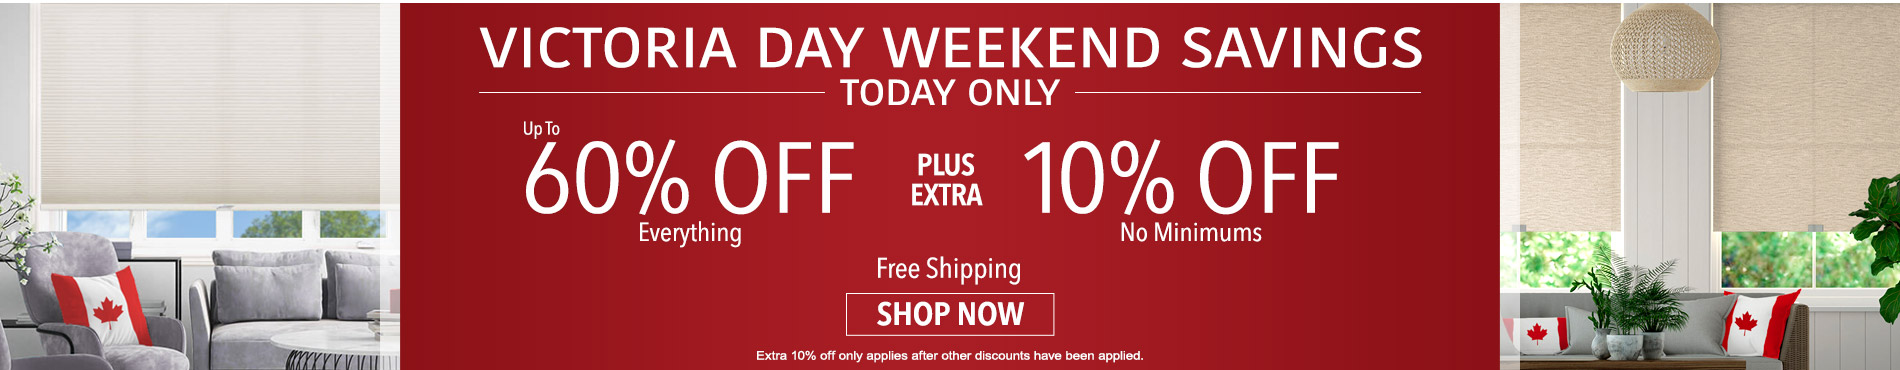 Save up to 60% + extra 10% on everything